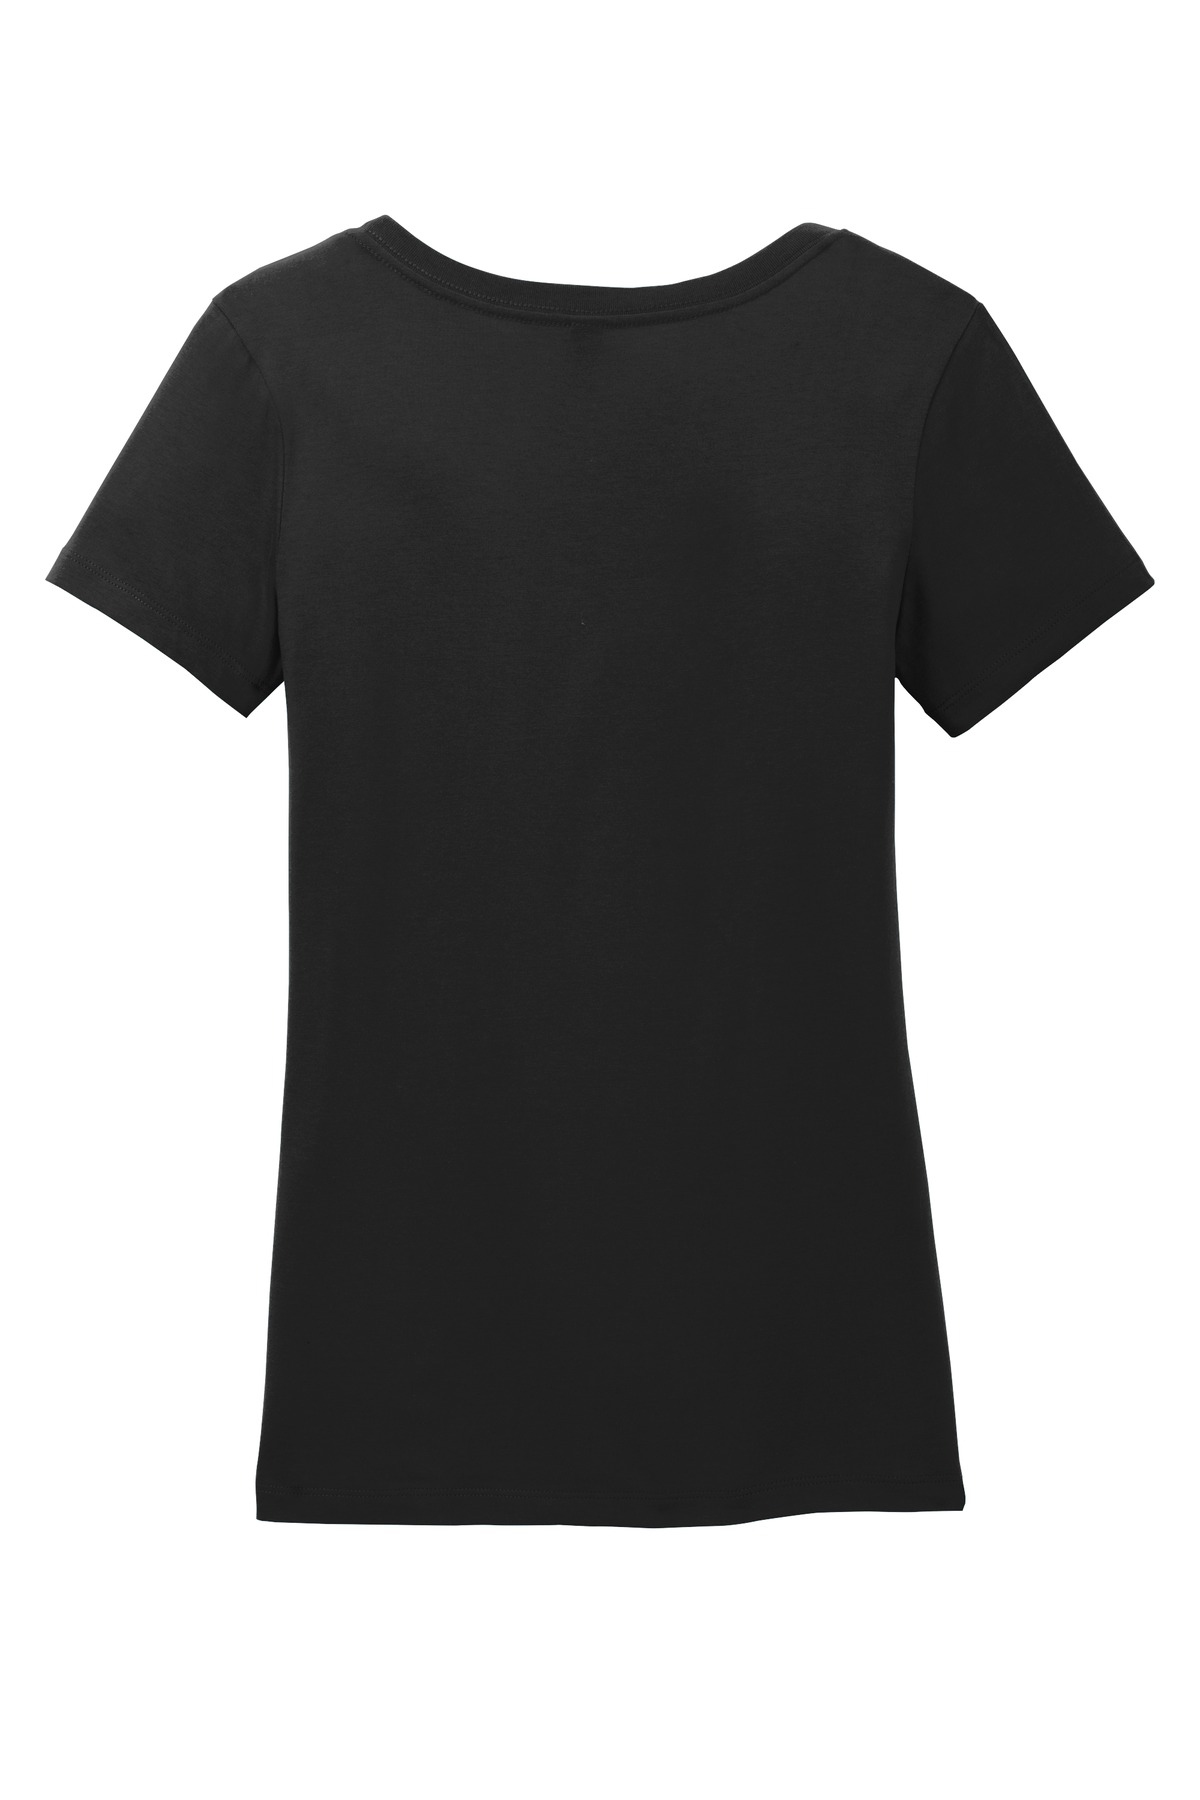 District ® Women’s Perfect Weight ® Scoop Neck Tee | Ring Spun | T ...